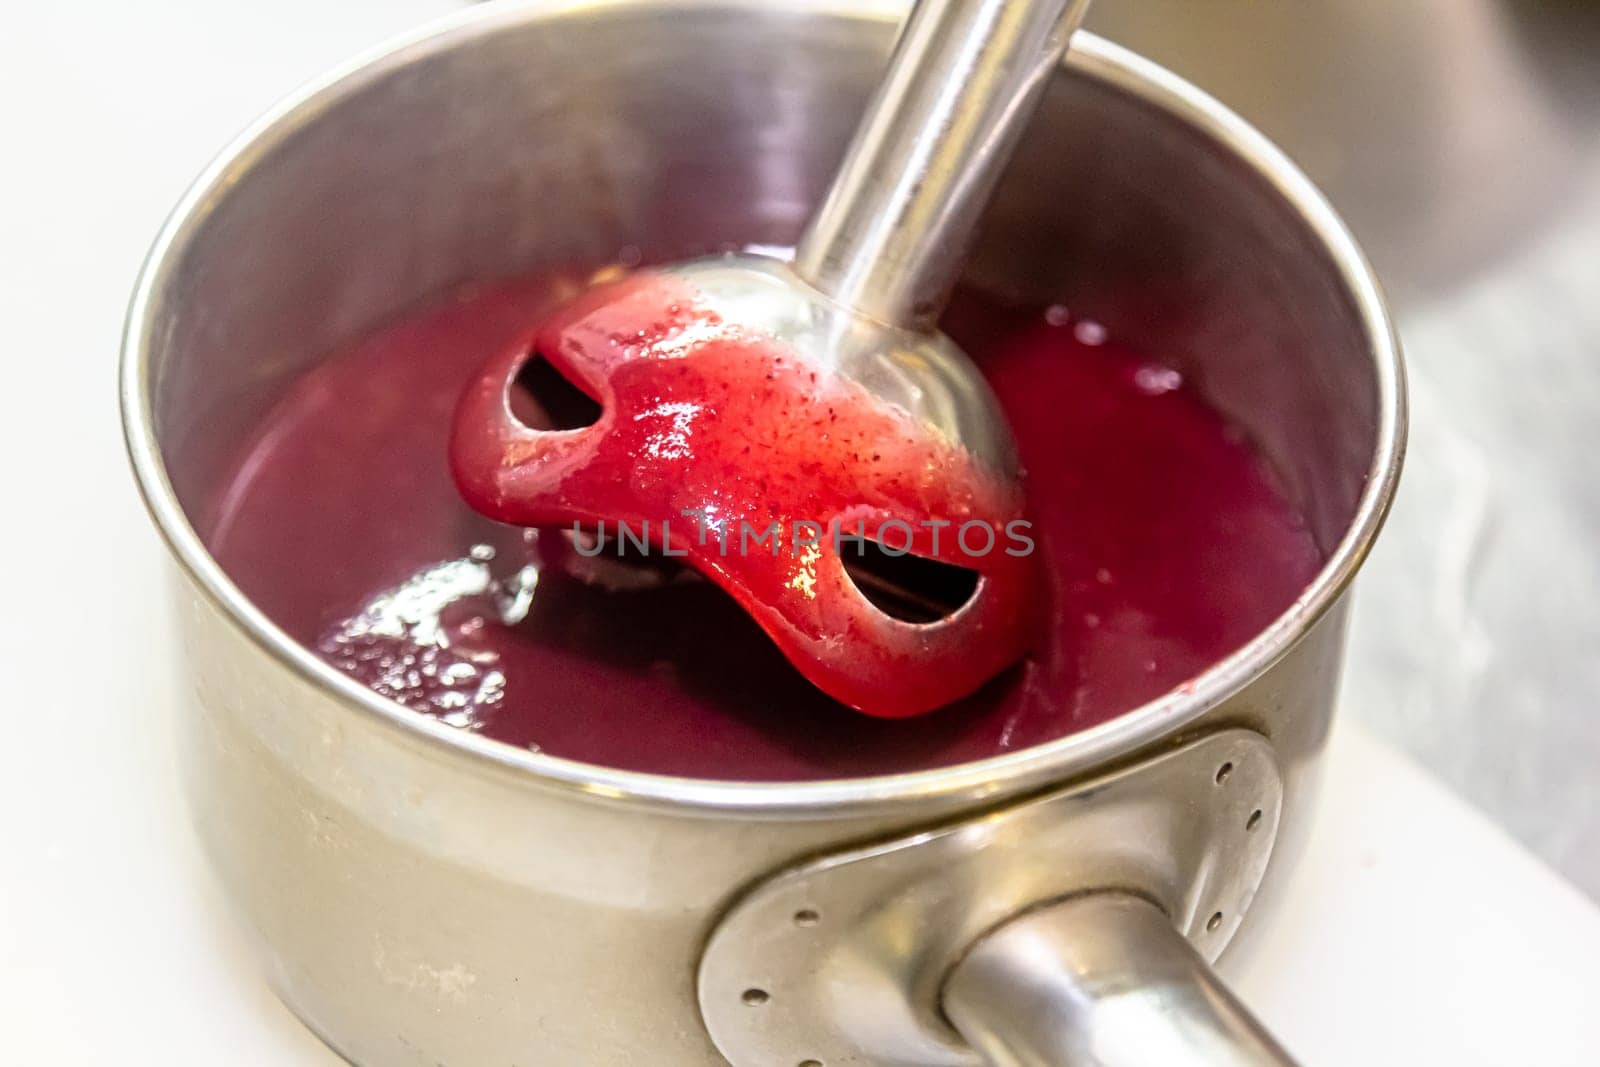 The cook uses a blender to prepare berry puree by Milanchikov